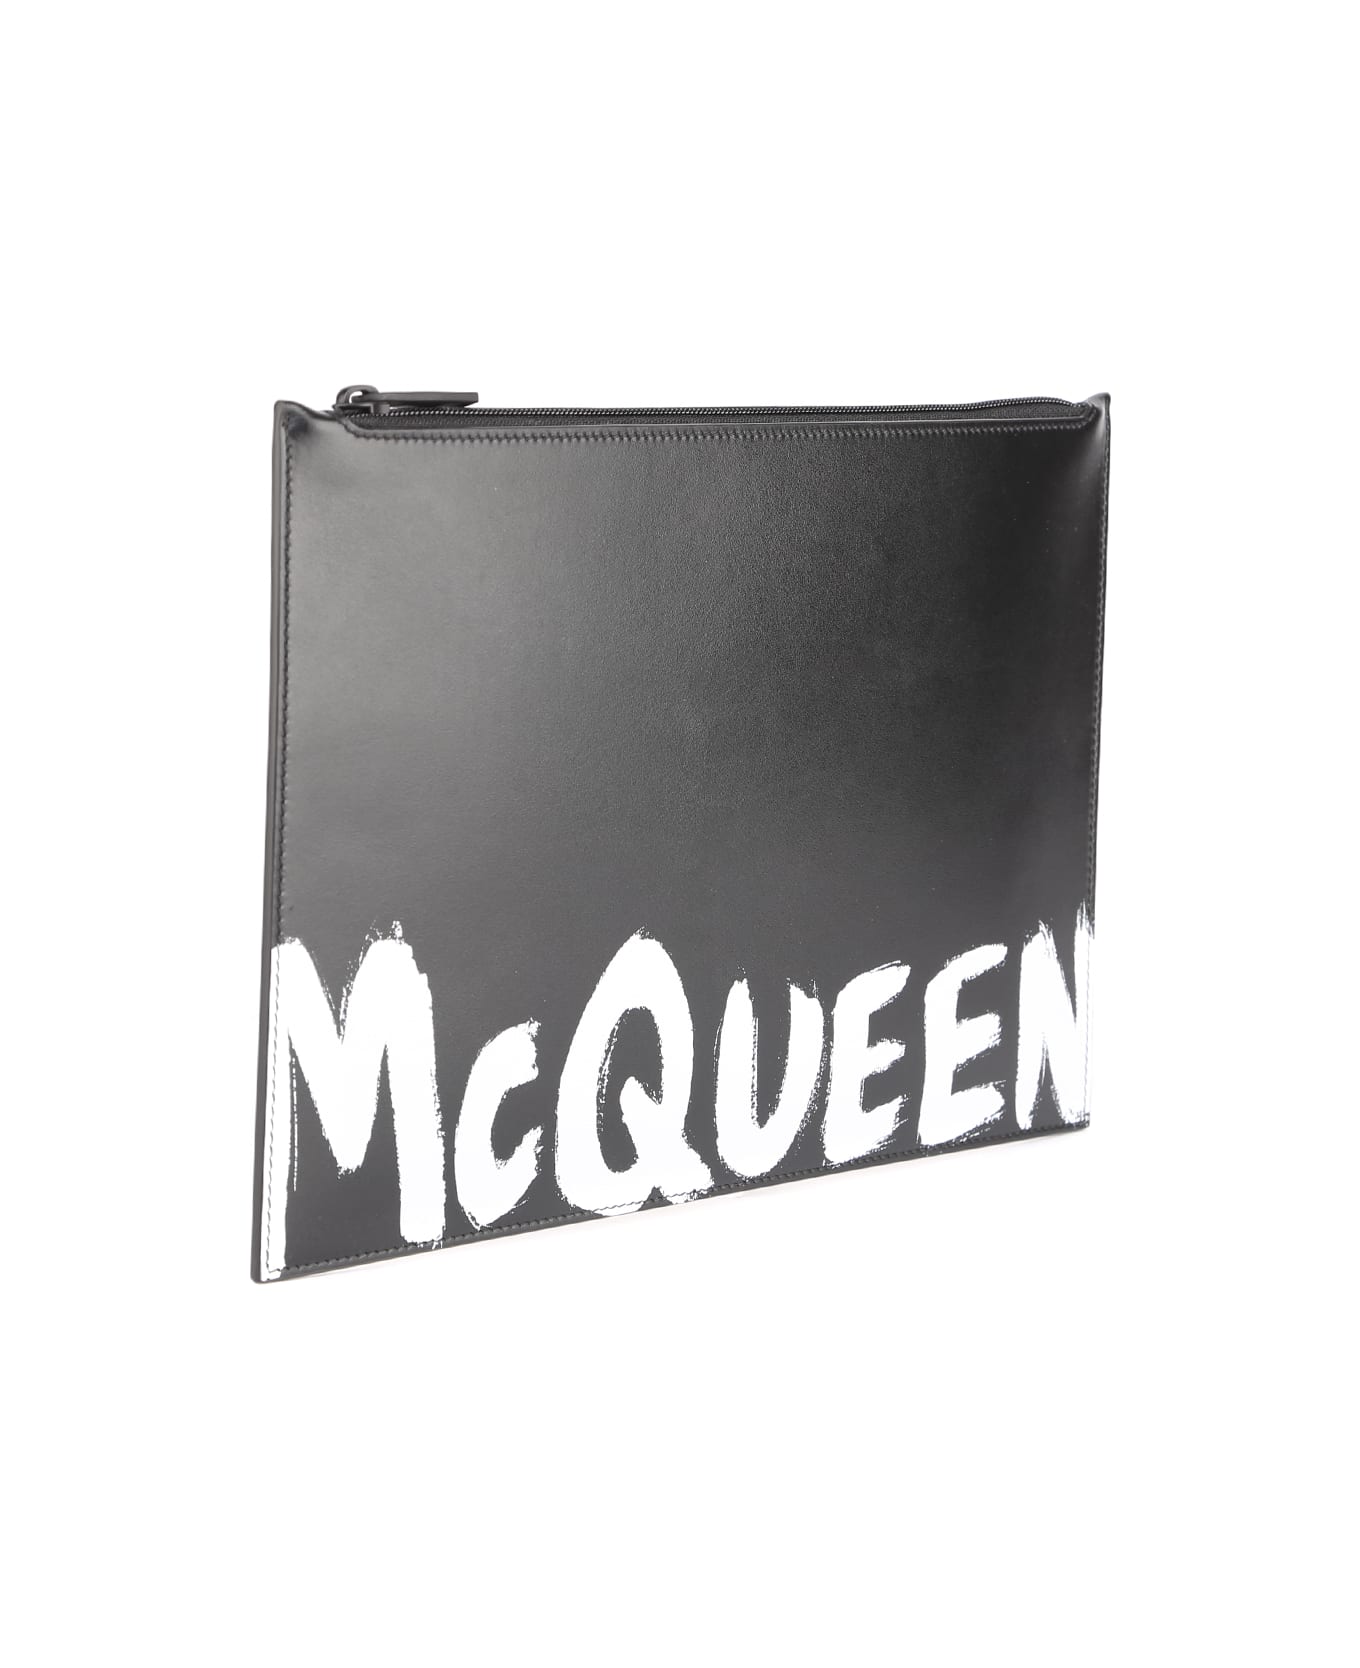 Alexander McQueen Leather Clutch Bag With Contrasting Logo - Black/white